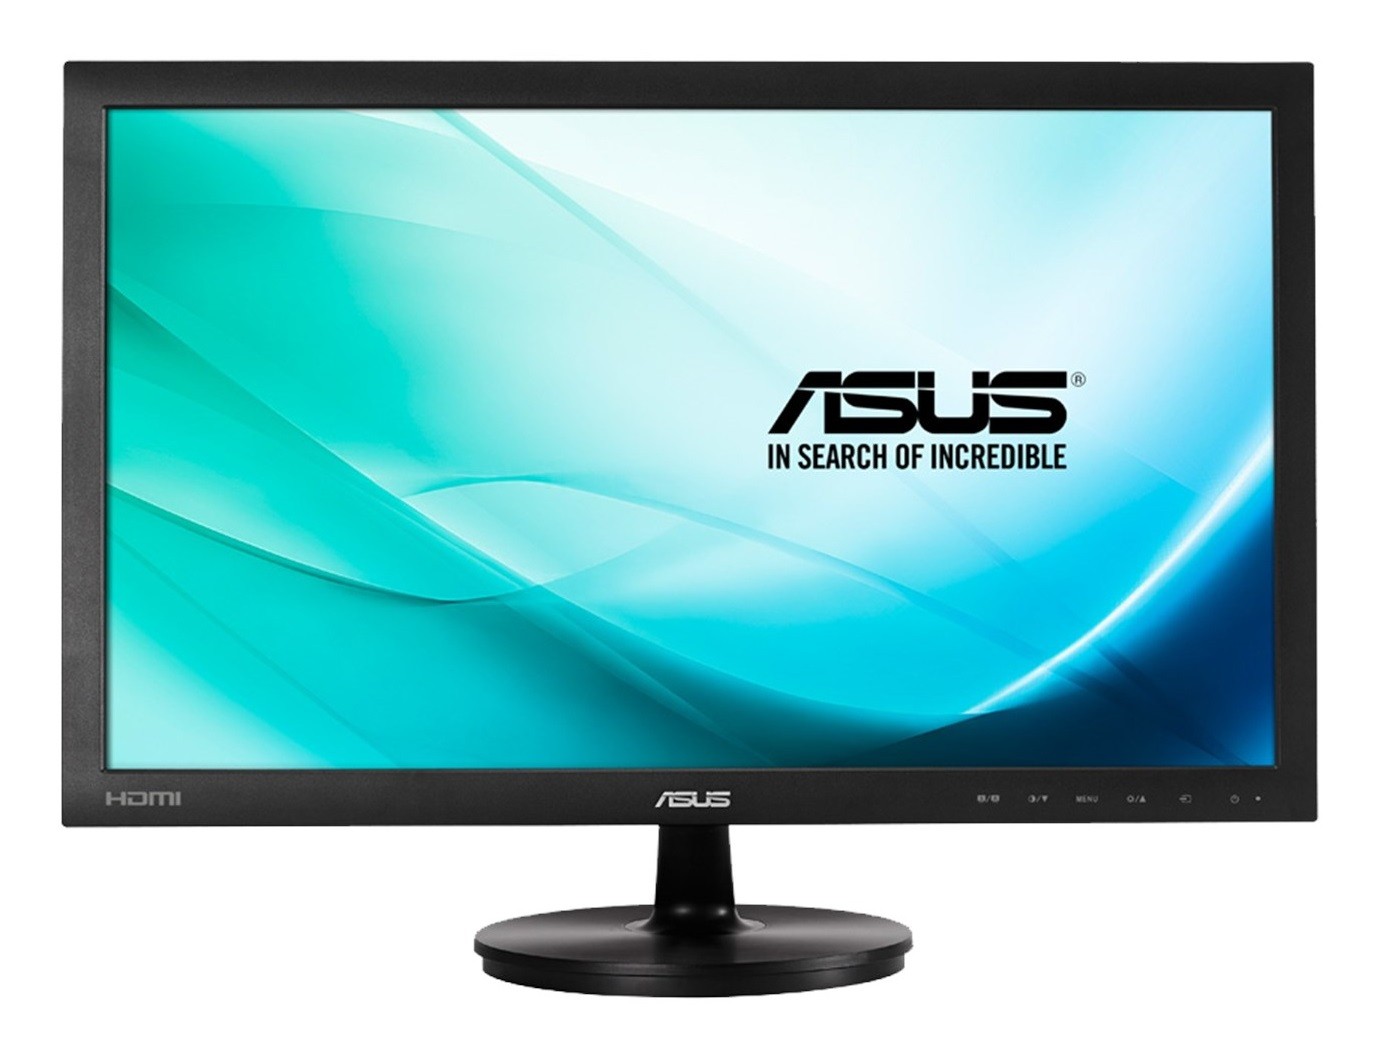 asus vs247 monitor out of range